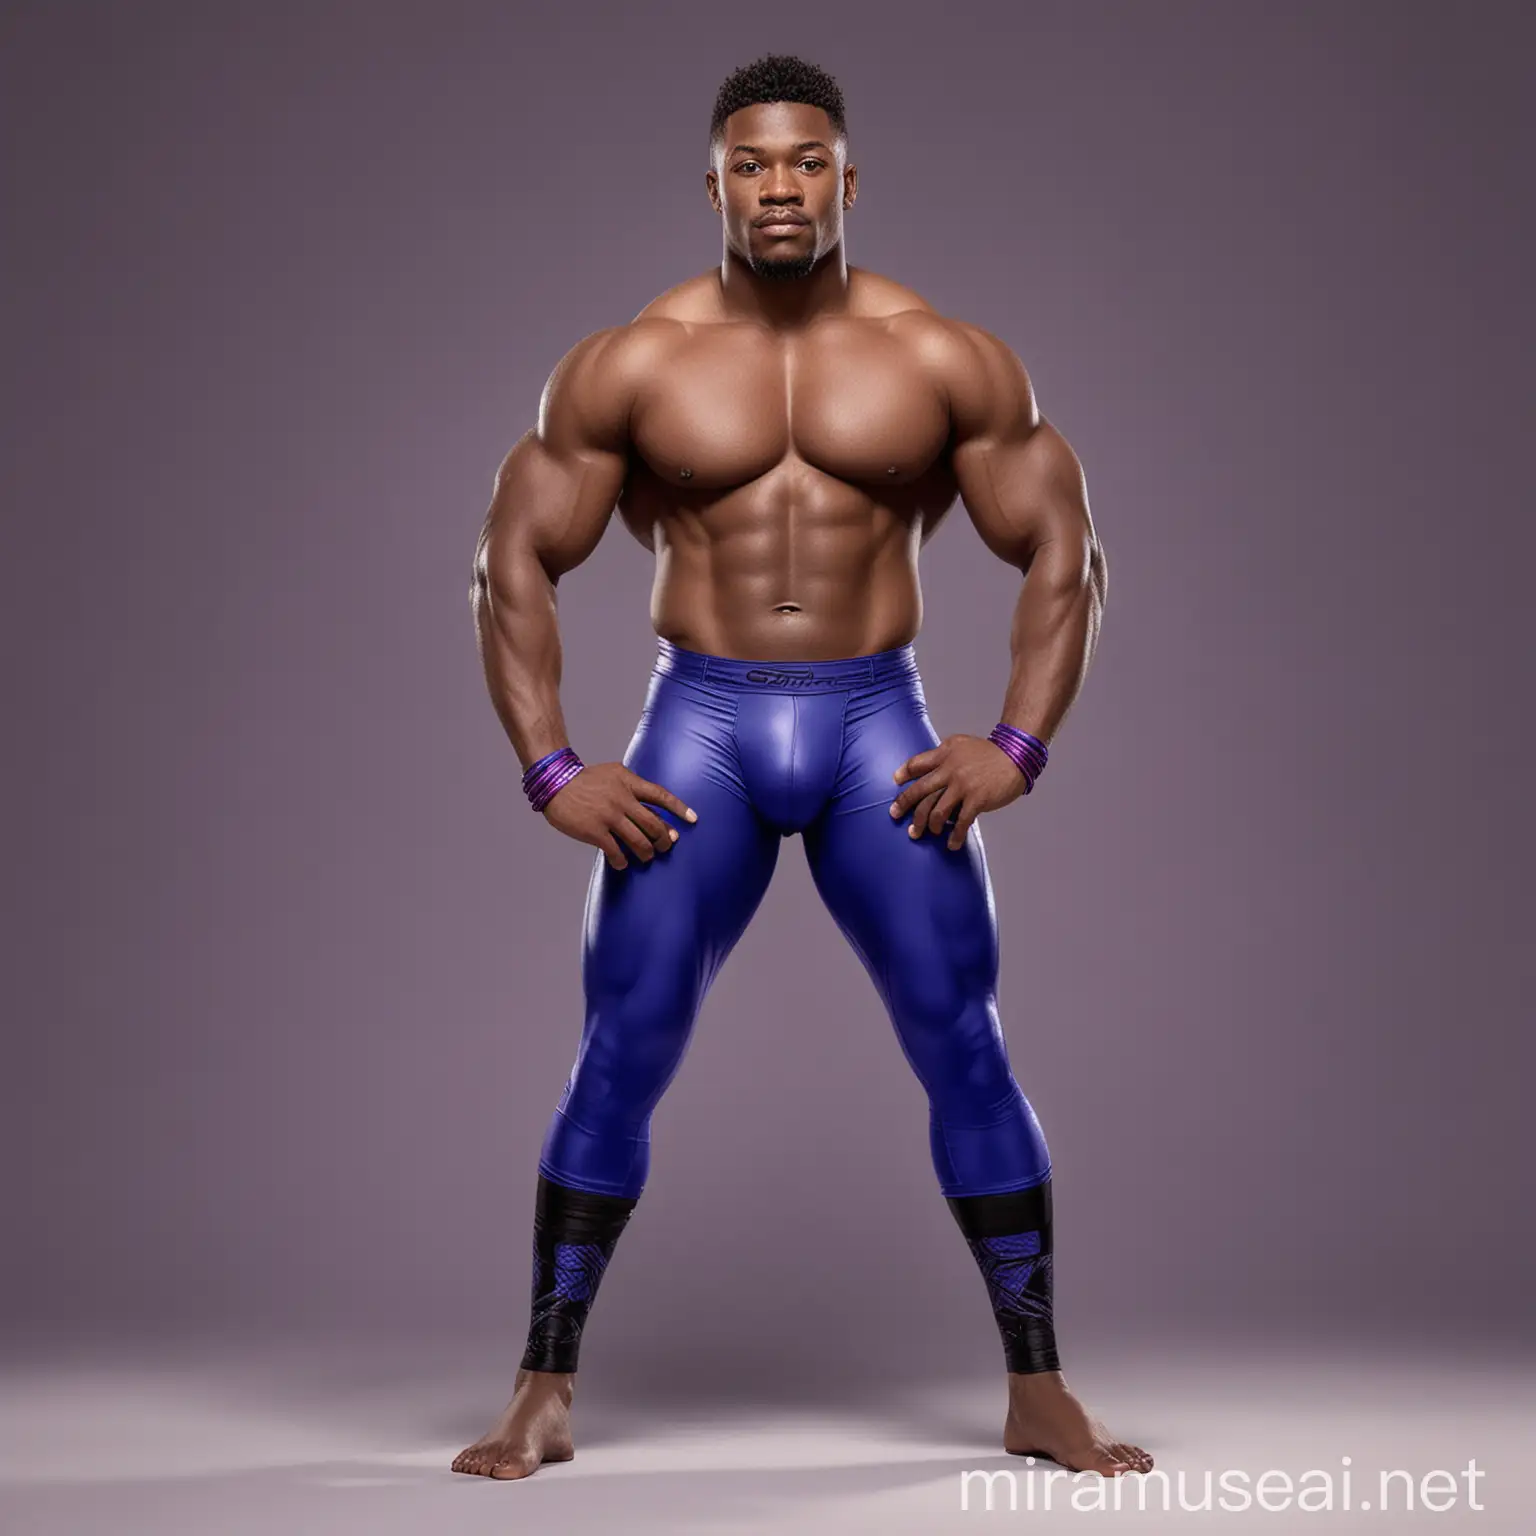 Powerful African American Wrestler in Vibrant Cobalt Blue and Black Attire